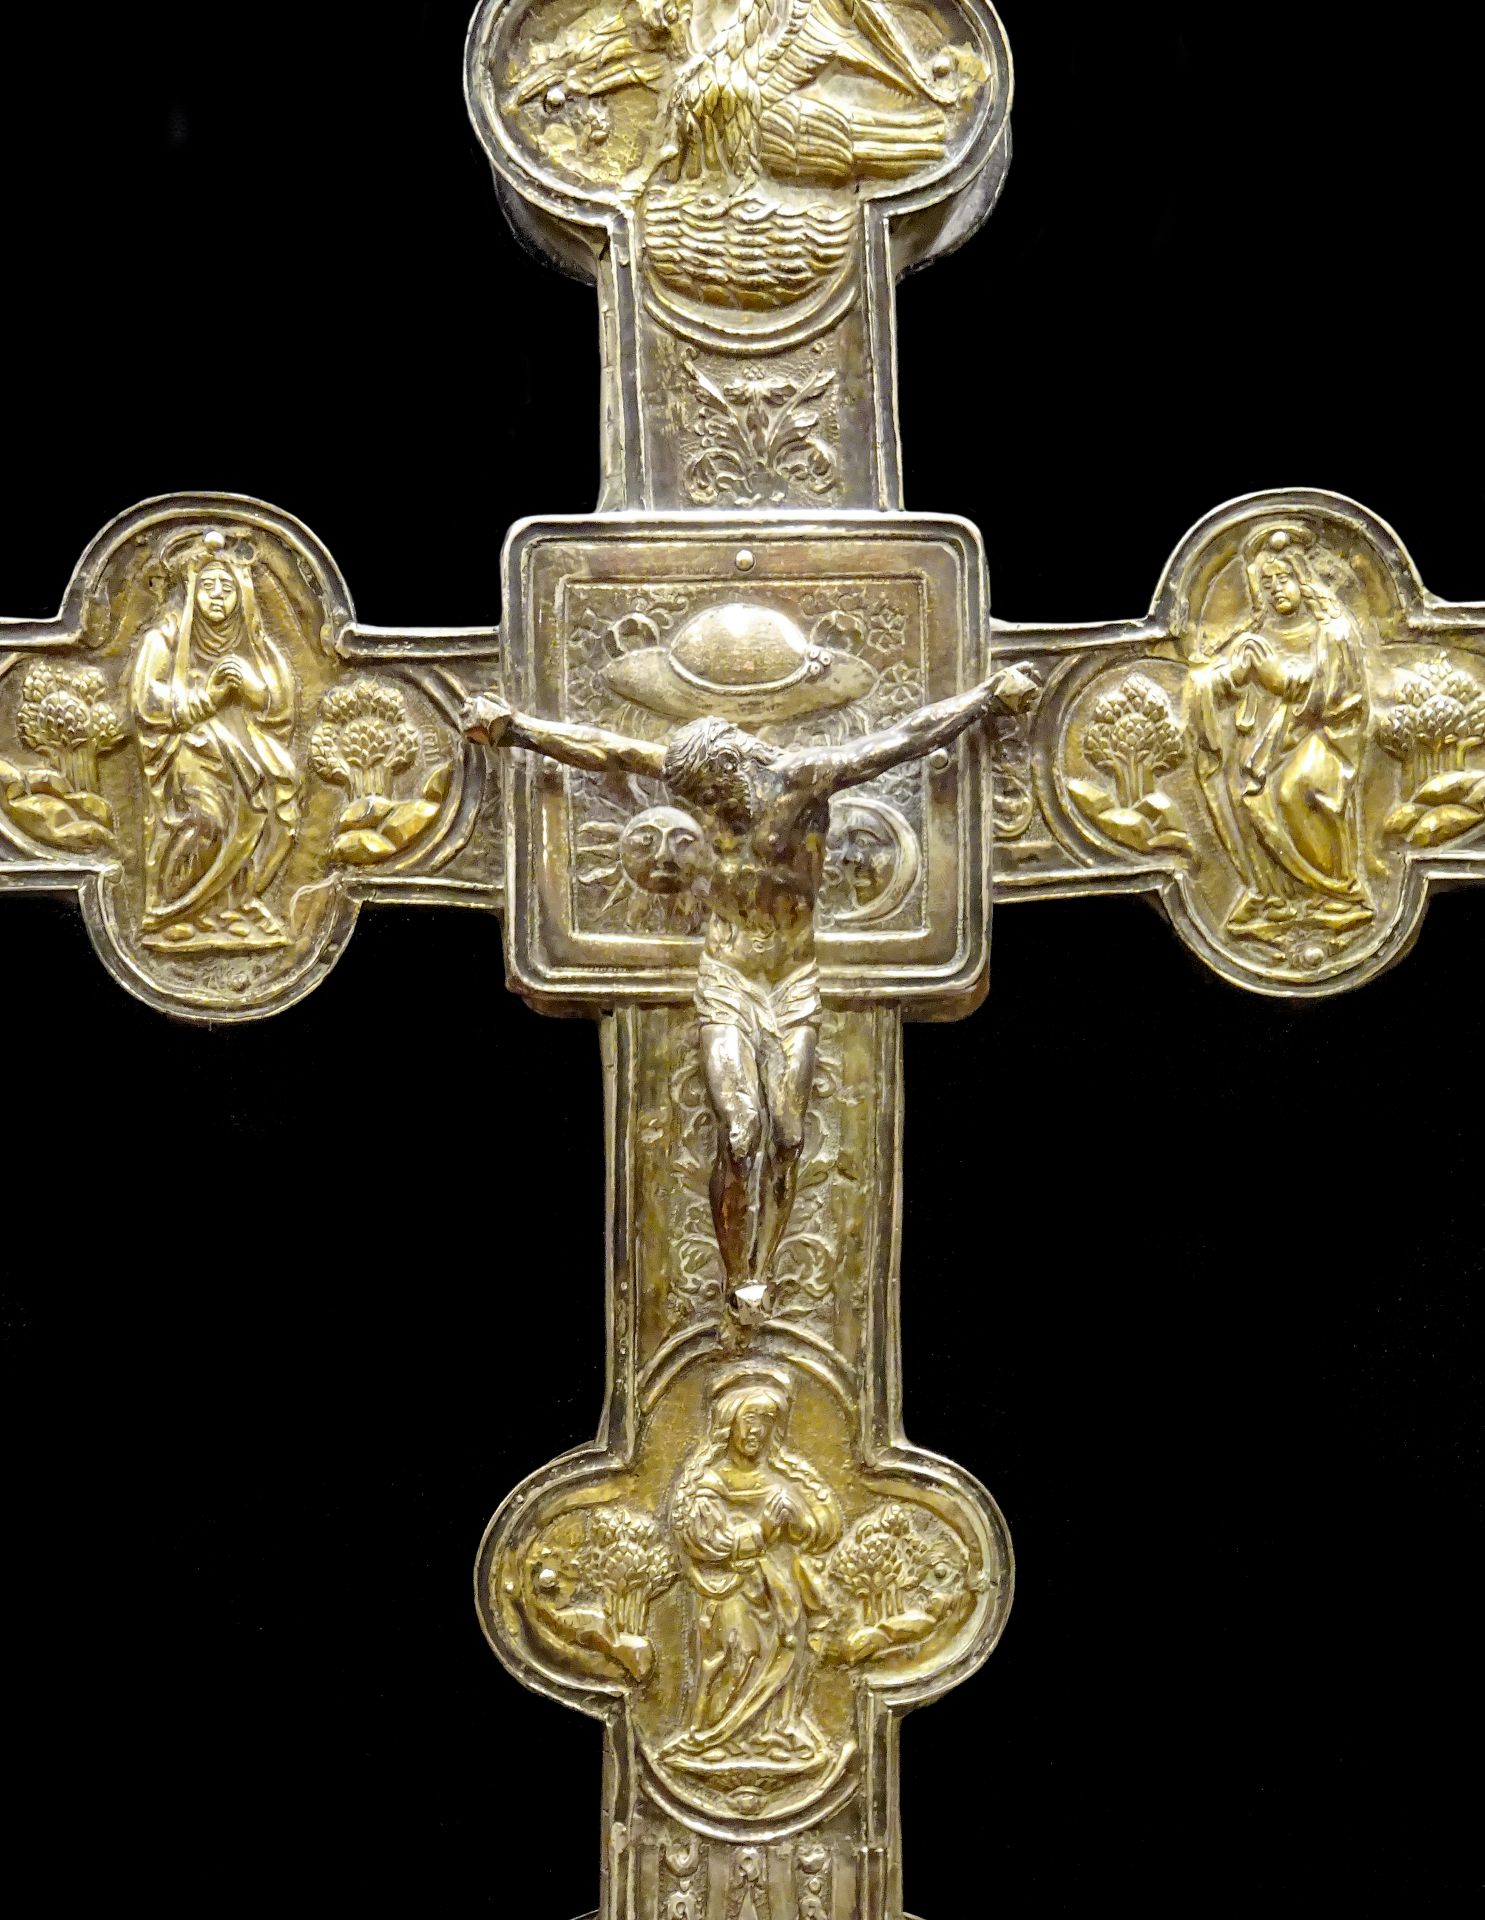 Important Valencian Gothic Processional Cross from the end of the 14th century, in fine gilded silve - Image 3 of 5